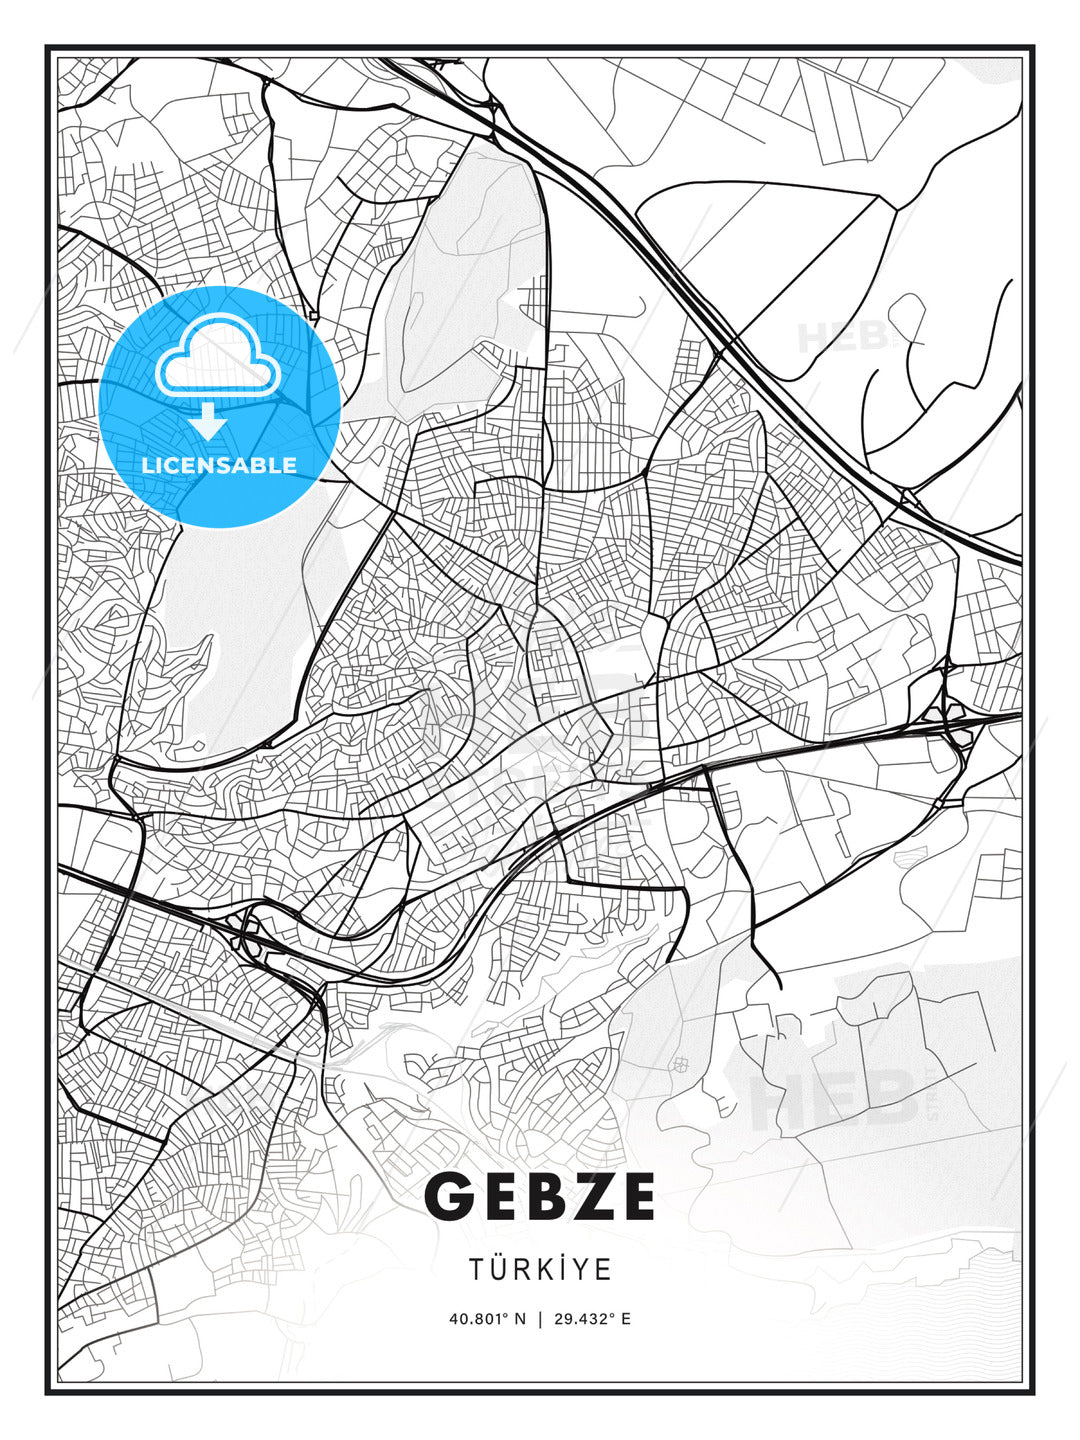 Gebze, Turkey, Modern Print Template in Various Formats - HEBSTREITS Sketches